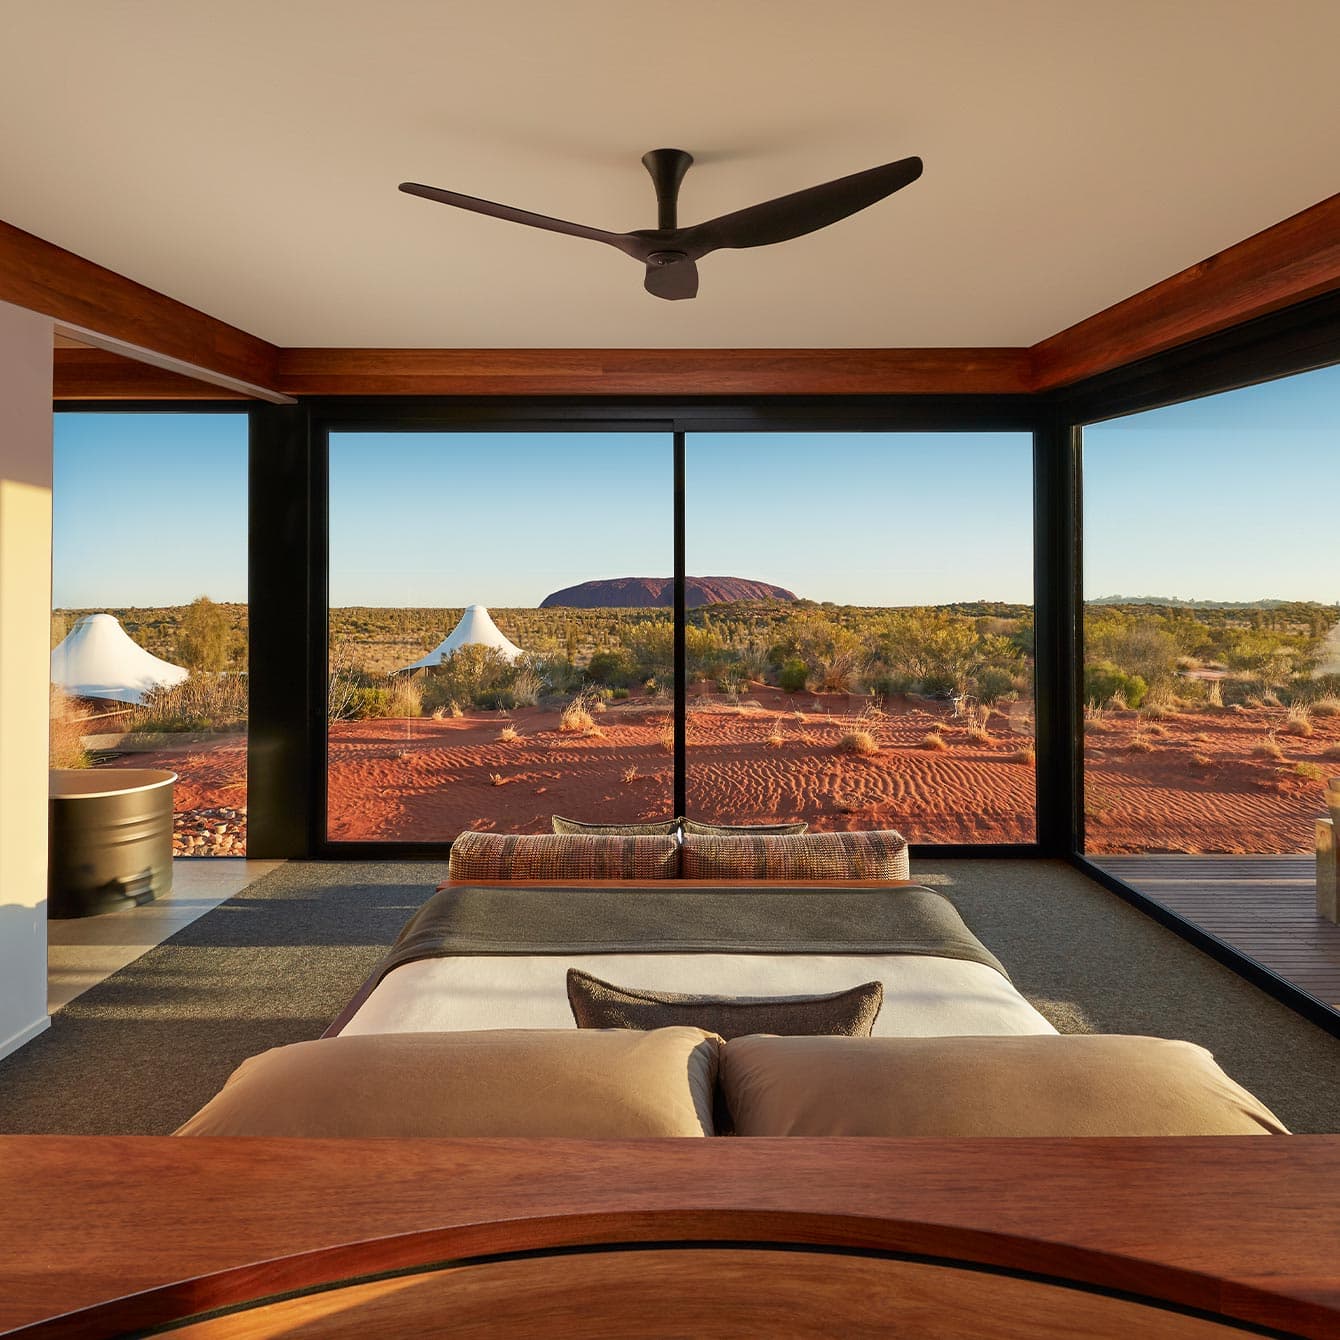 Baillie Lodges – See Australia’s Majesty Like Never Before At Four Hand-Picked Stops